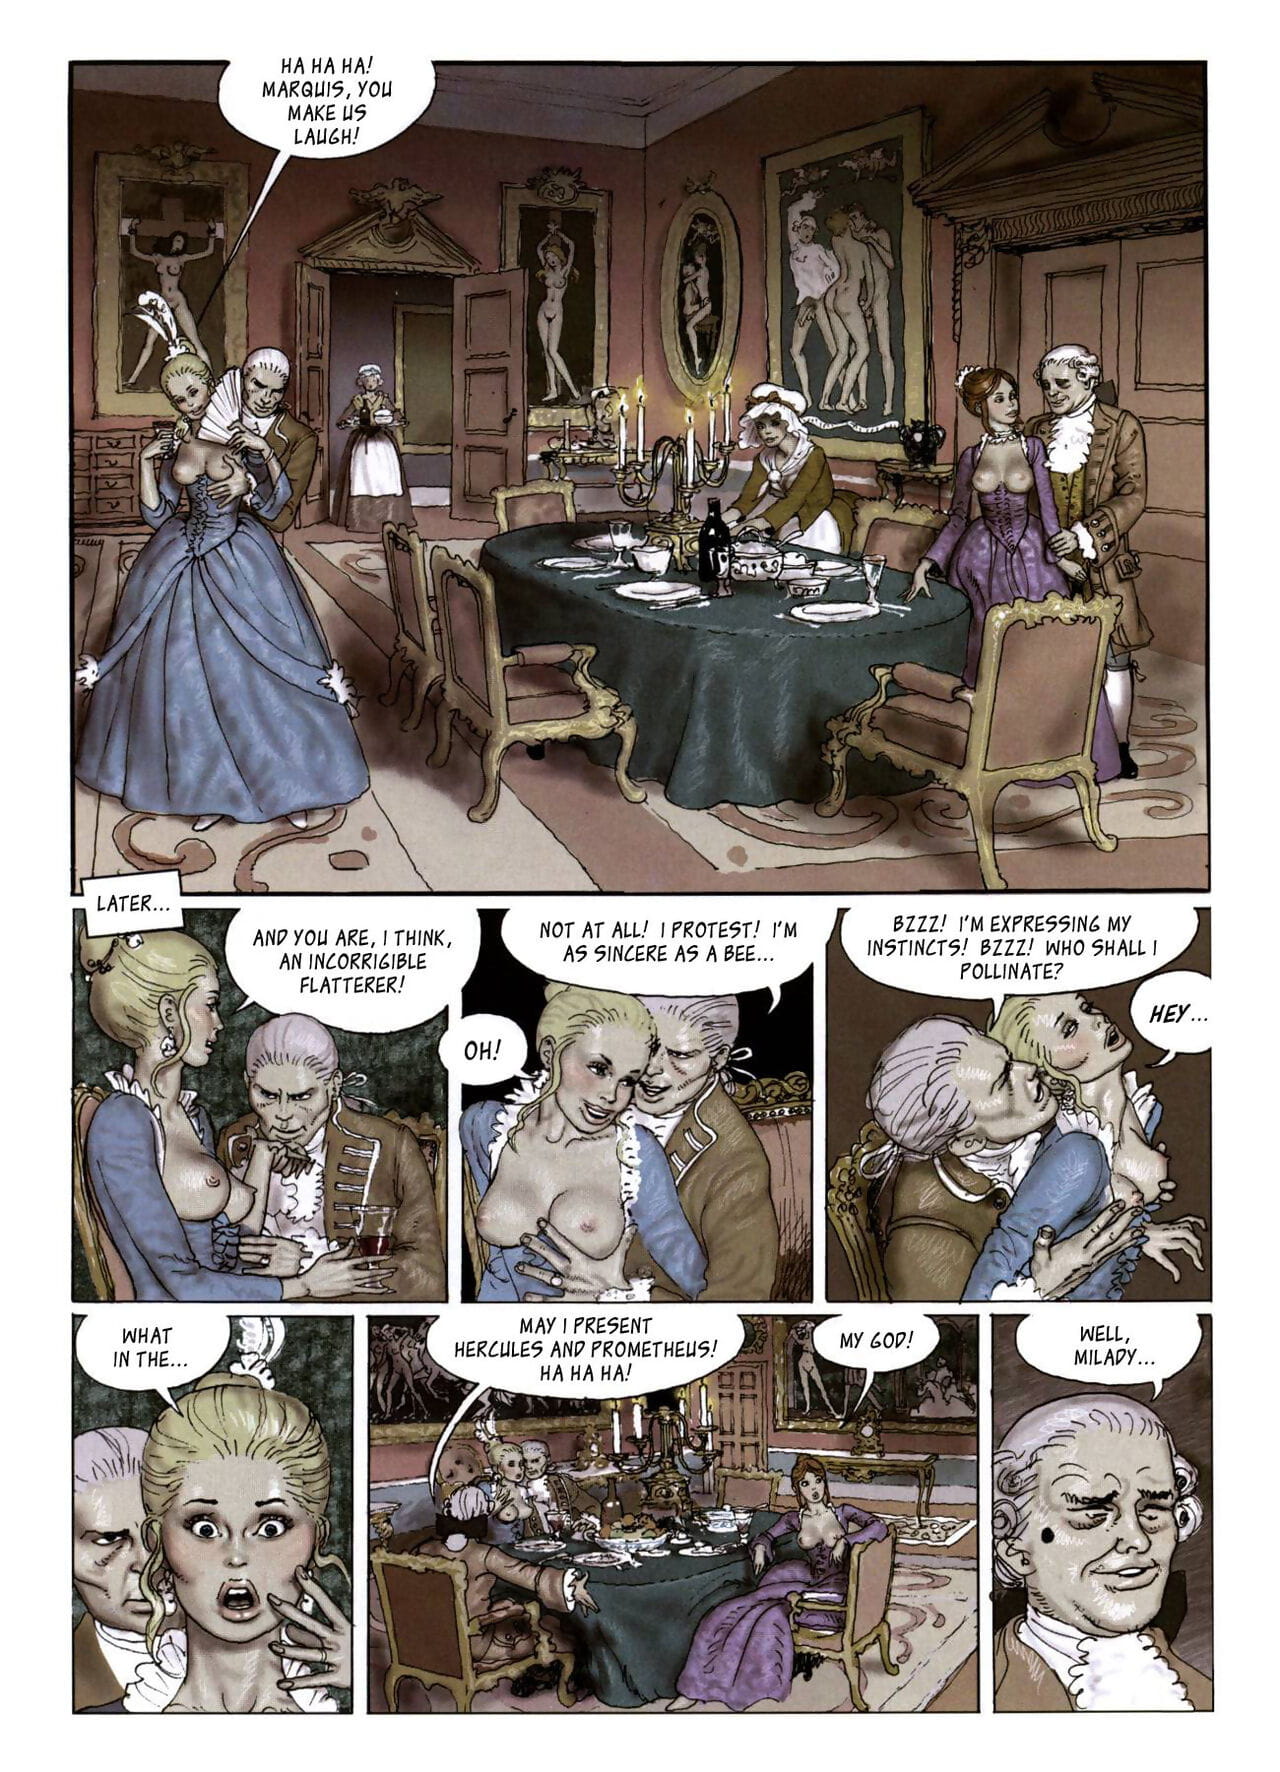 The Trouble of Janice - Volume #4 page 1